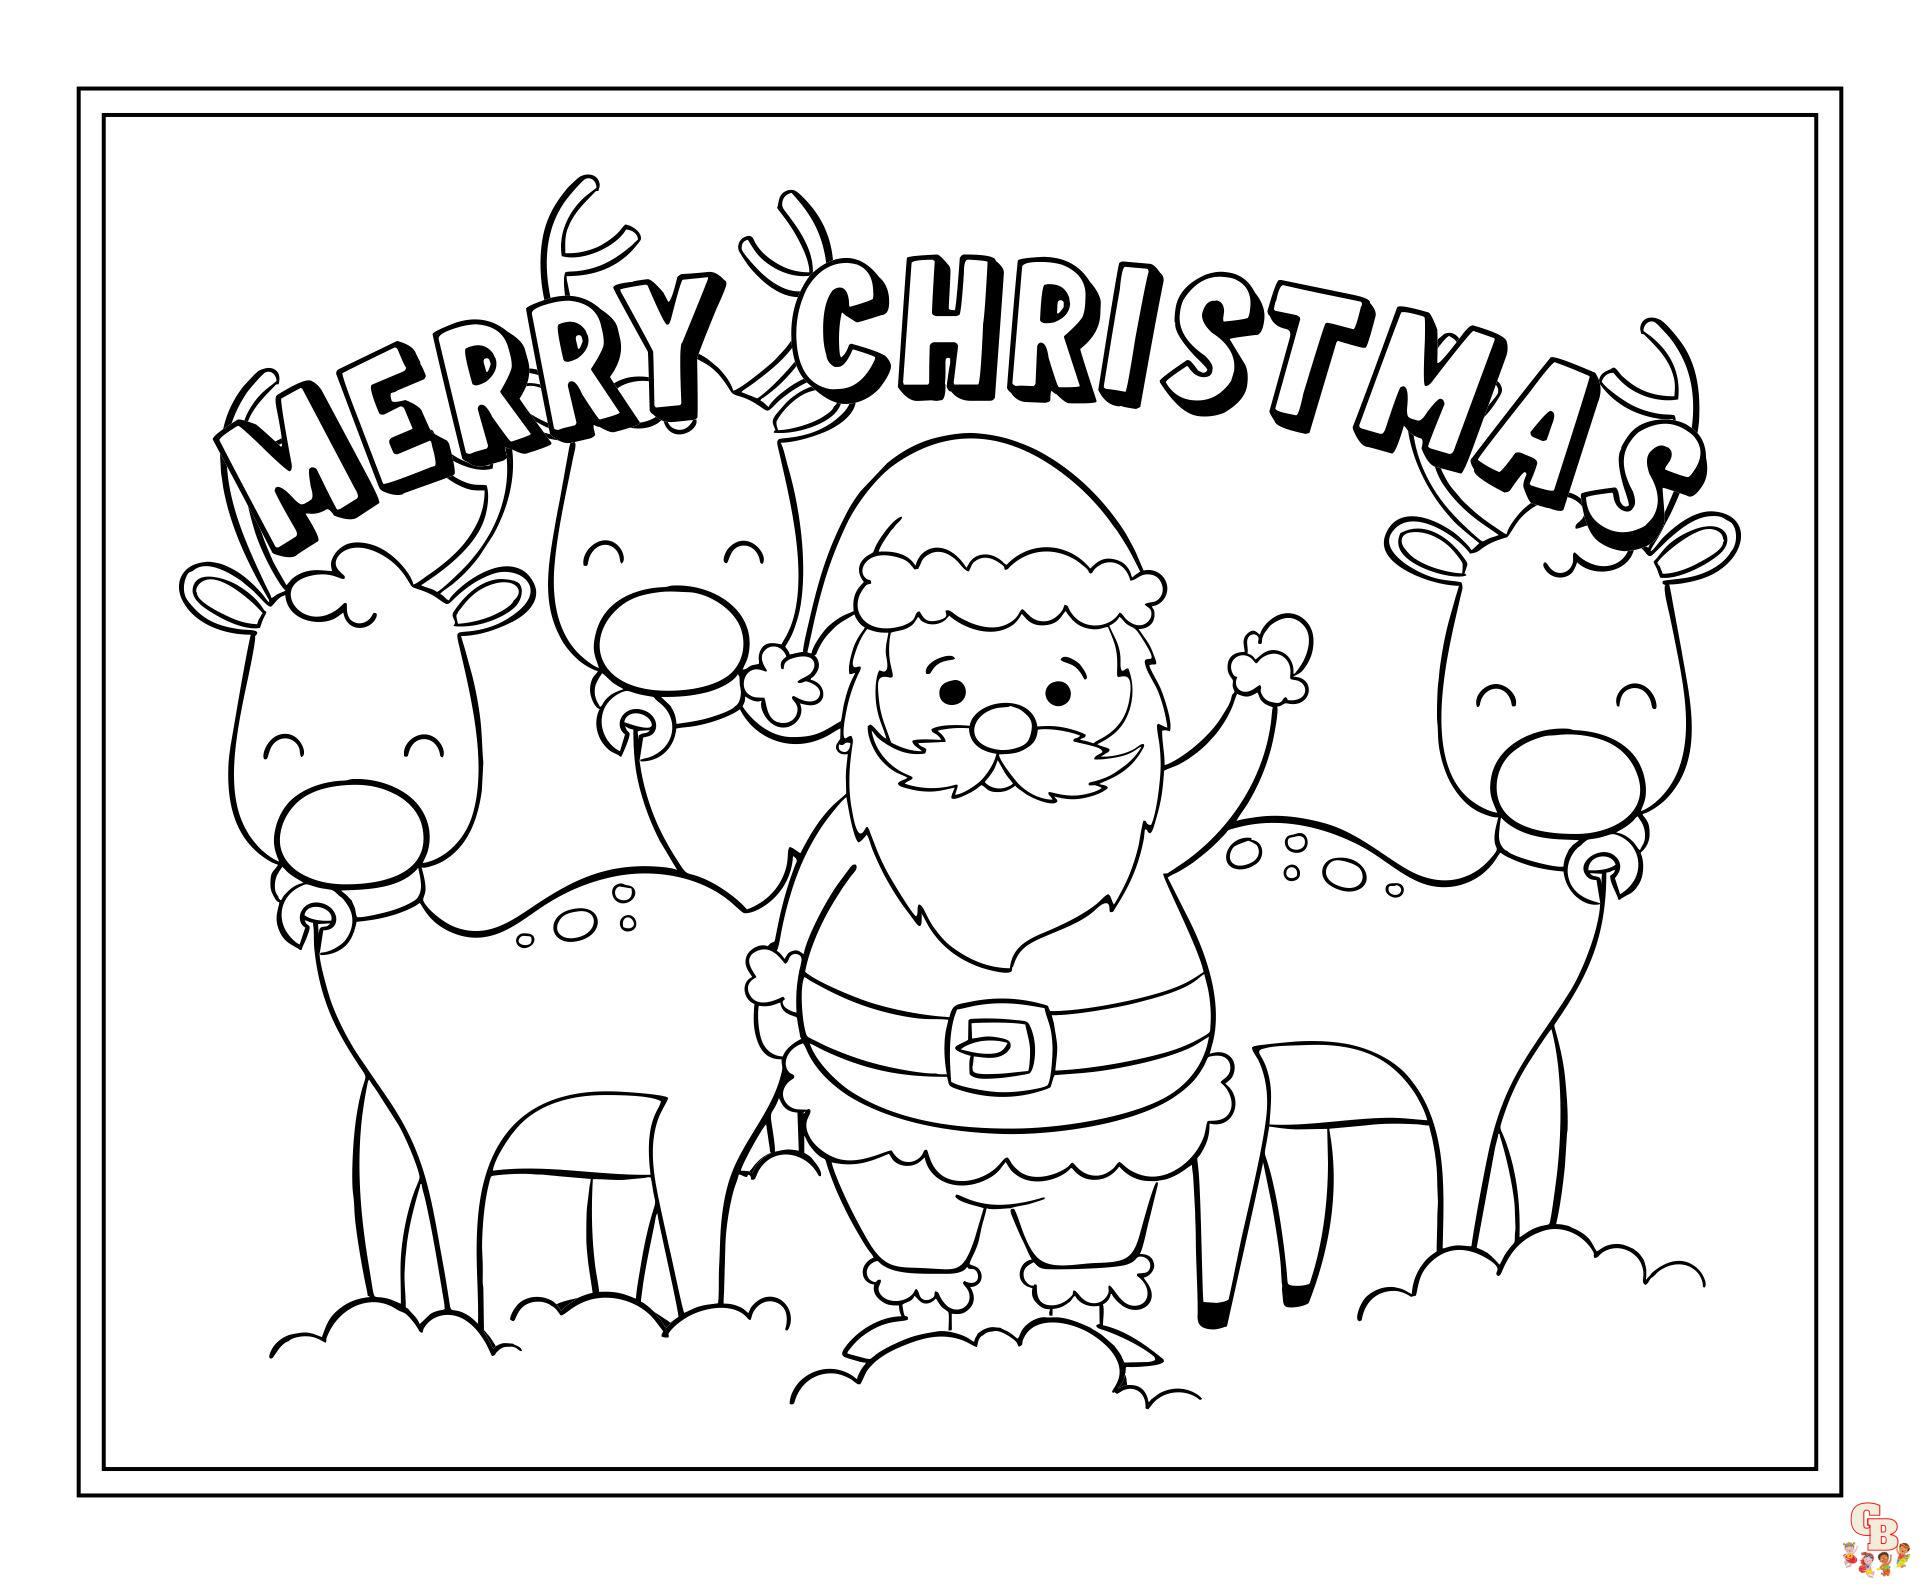 Christmas Cards Coloring Pages 4